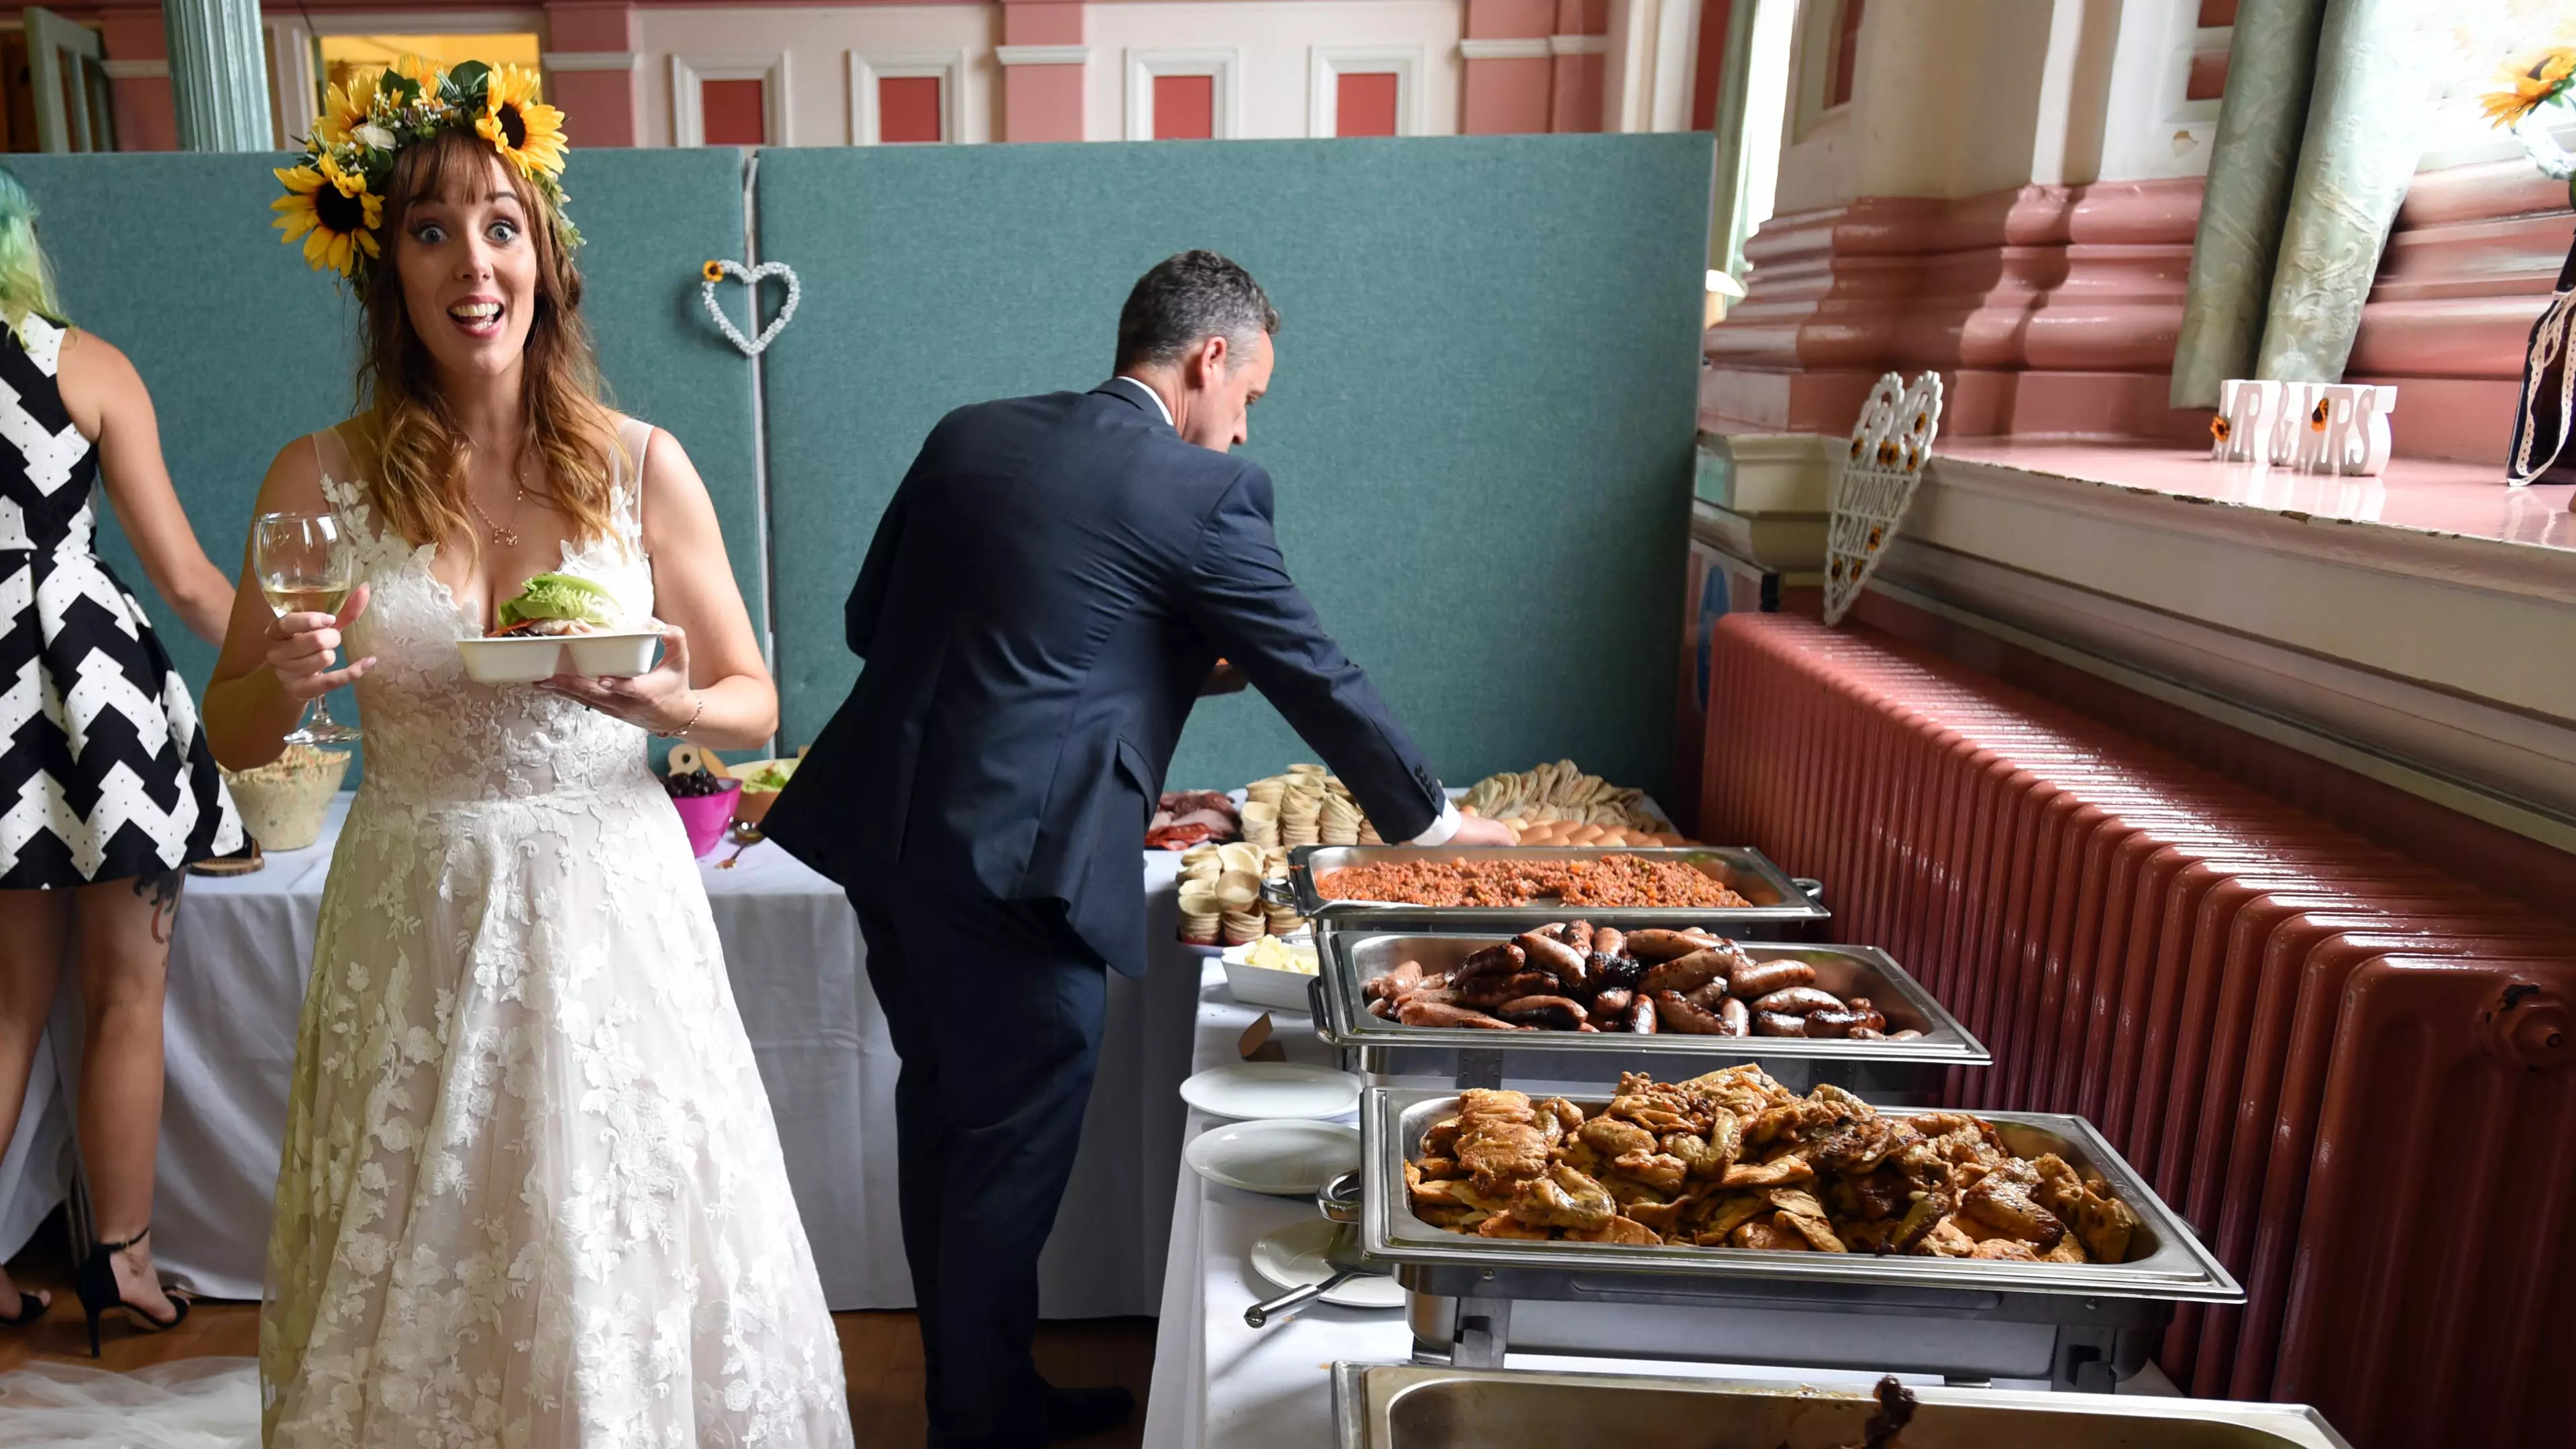 Couple Feed Wedding Guests For Just £5 A Head – Using 'Waste Food'  